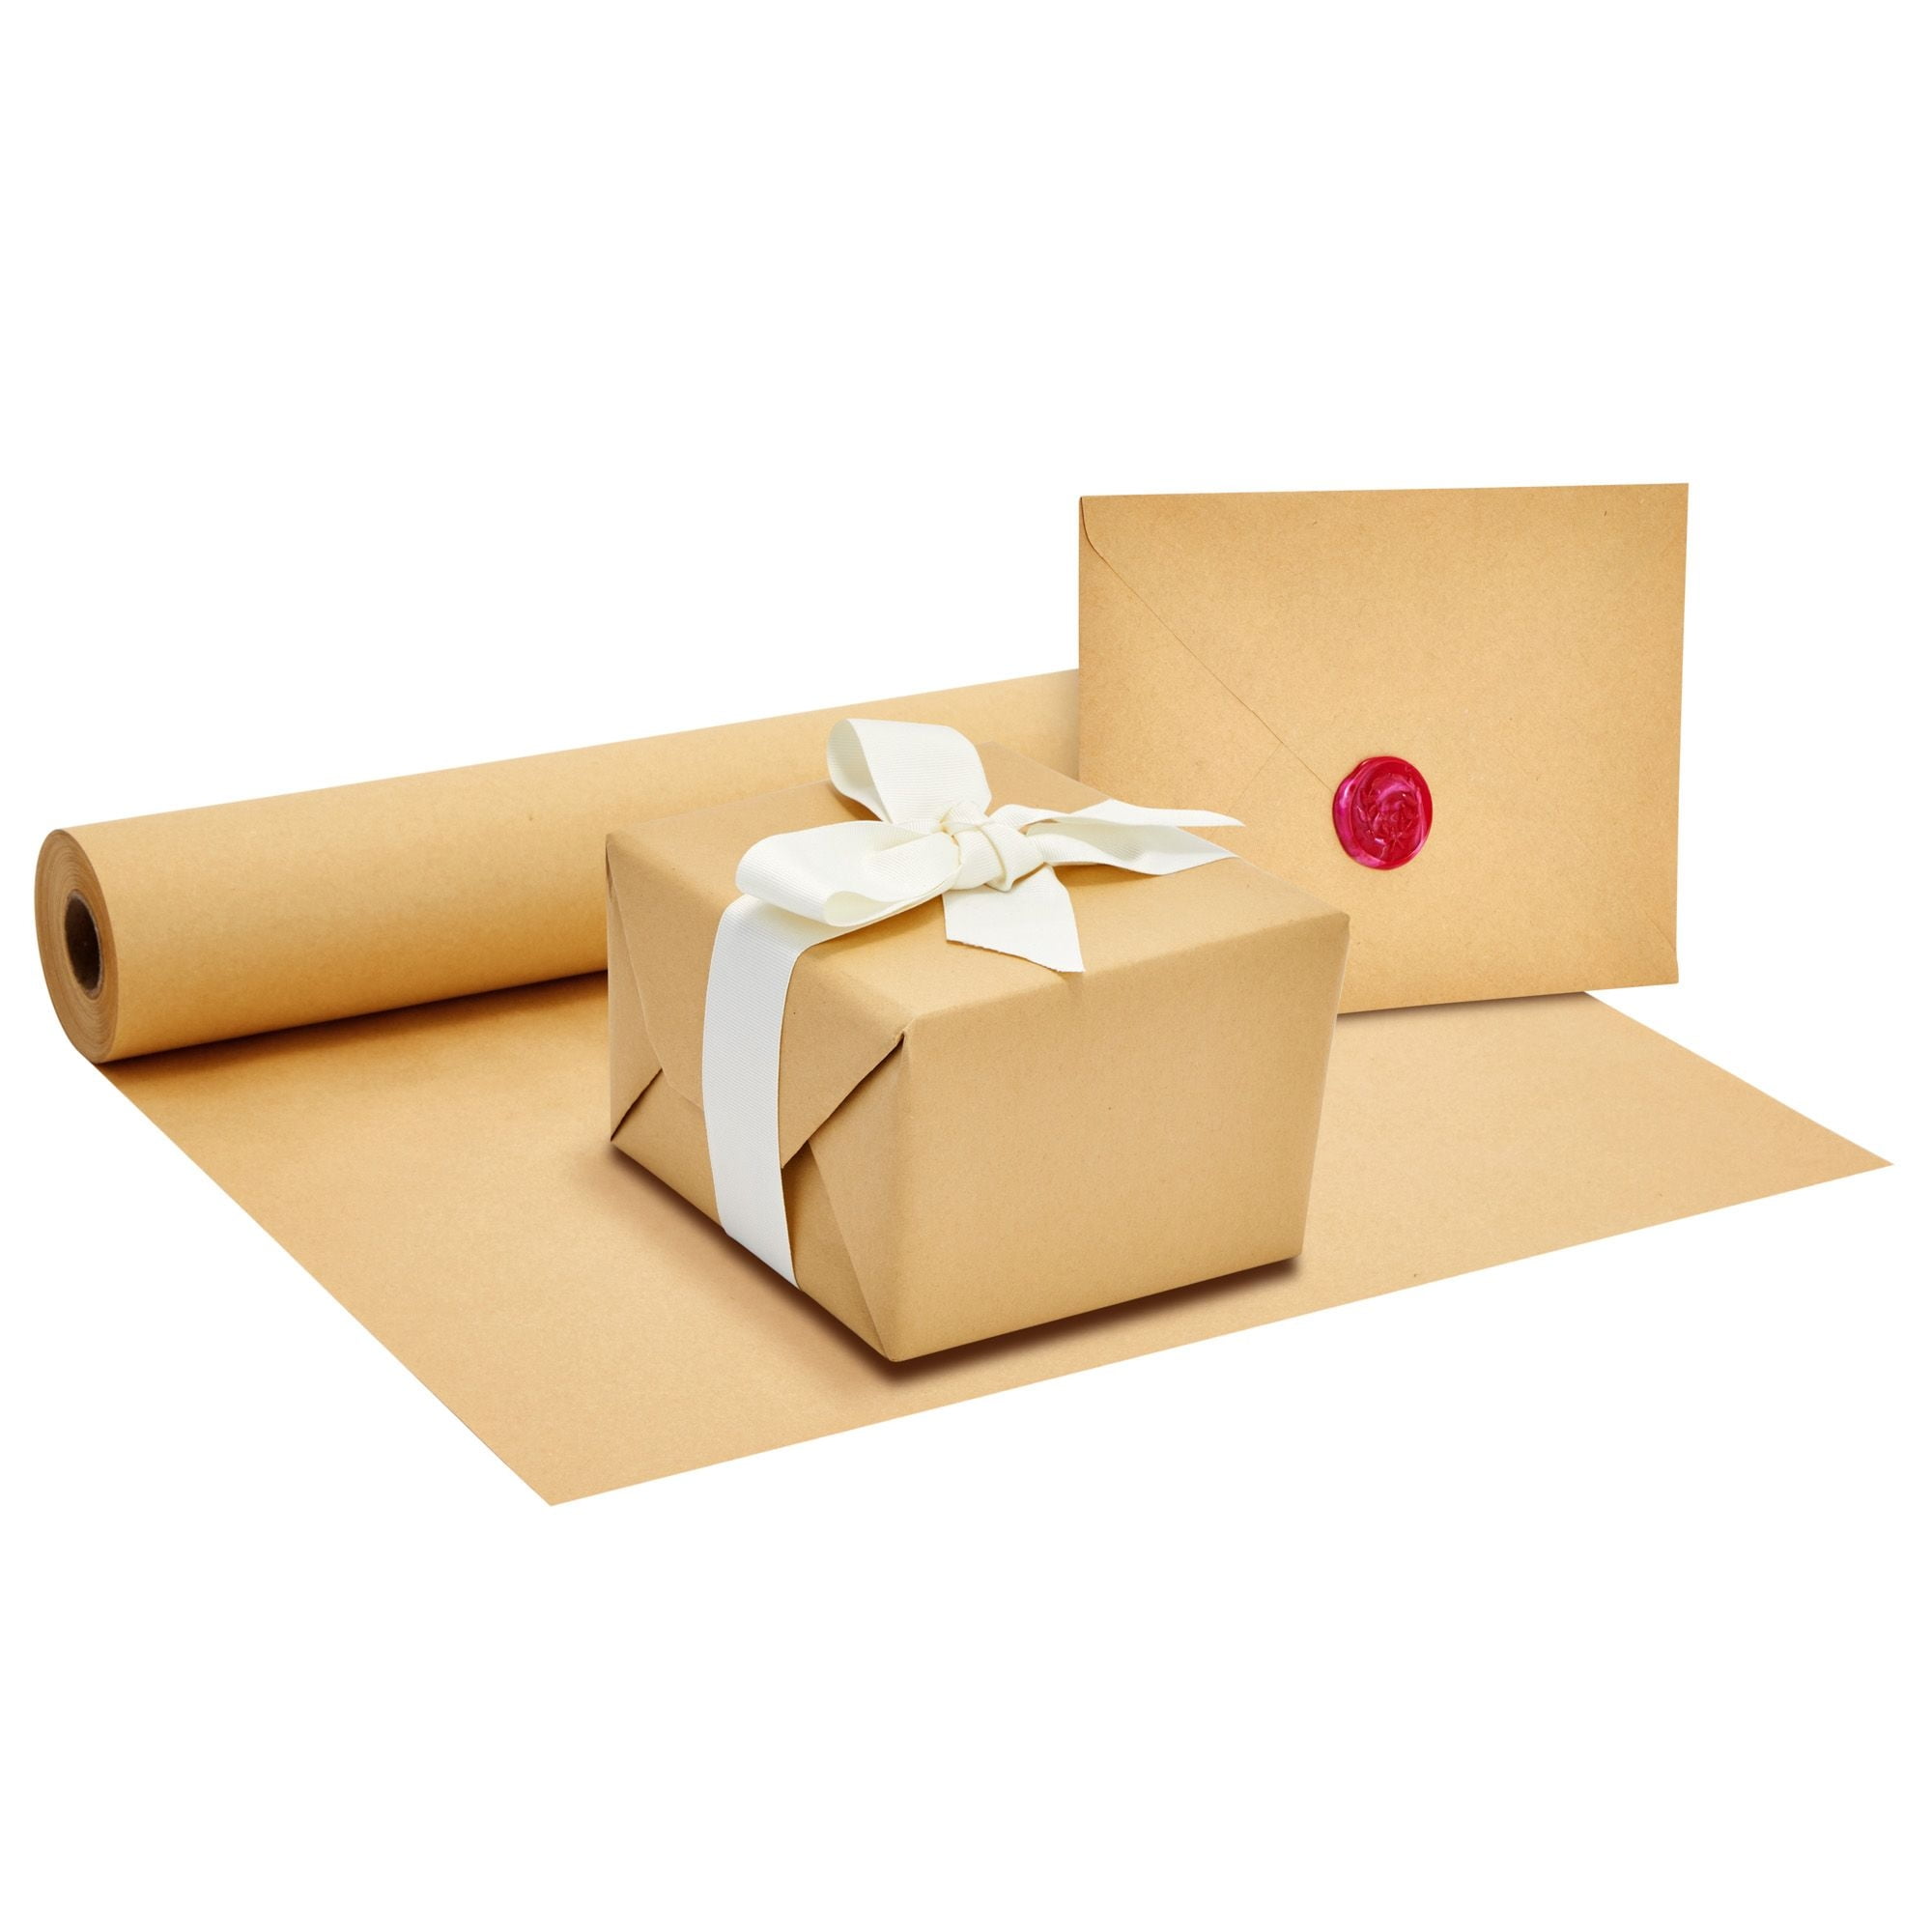 Brown Kraft Paper Roll 17.5 in x 1320 in (110 ft) Made in The USA - Brown  Paper Roll - Brown Wrapping Paper Roll - Brown Craft Paper Roll - Roll of  Paper - Kraft Wrapping Paper, Shipping Paper